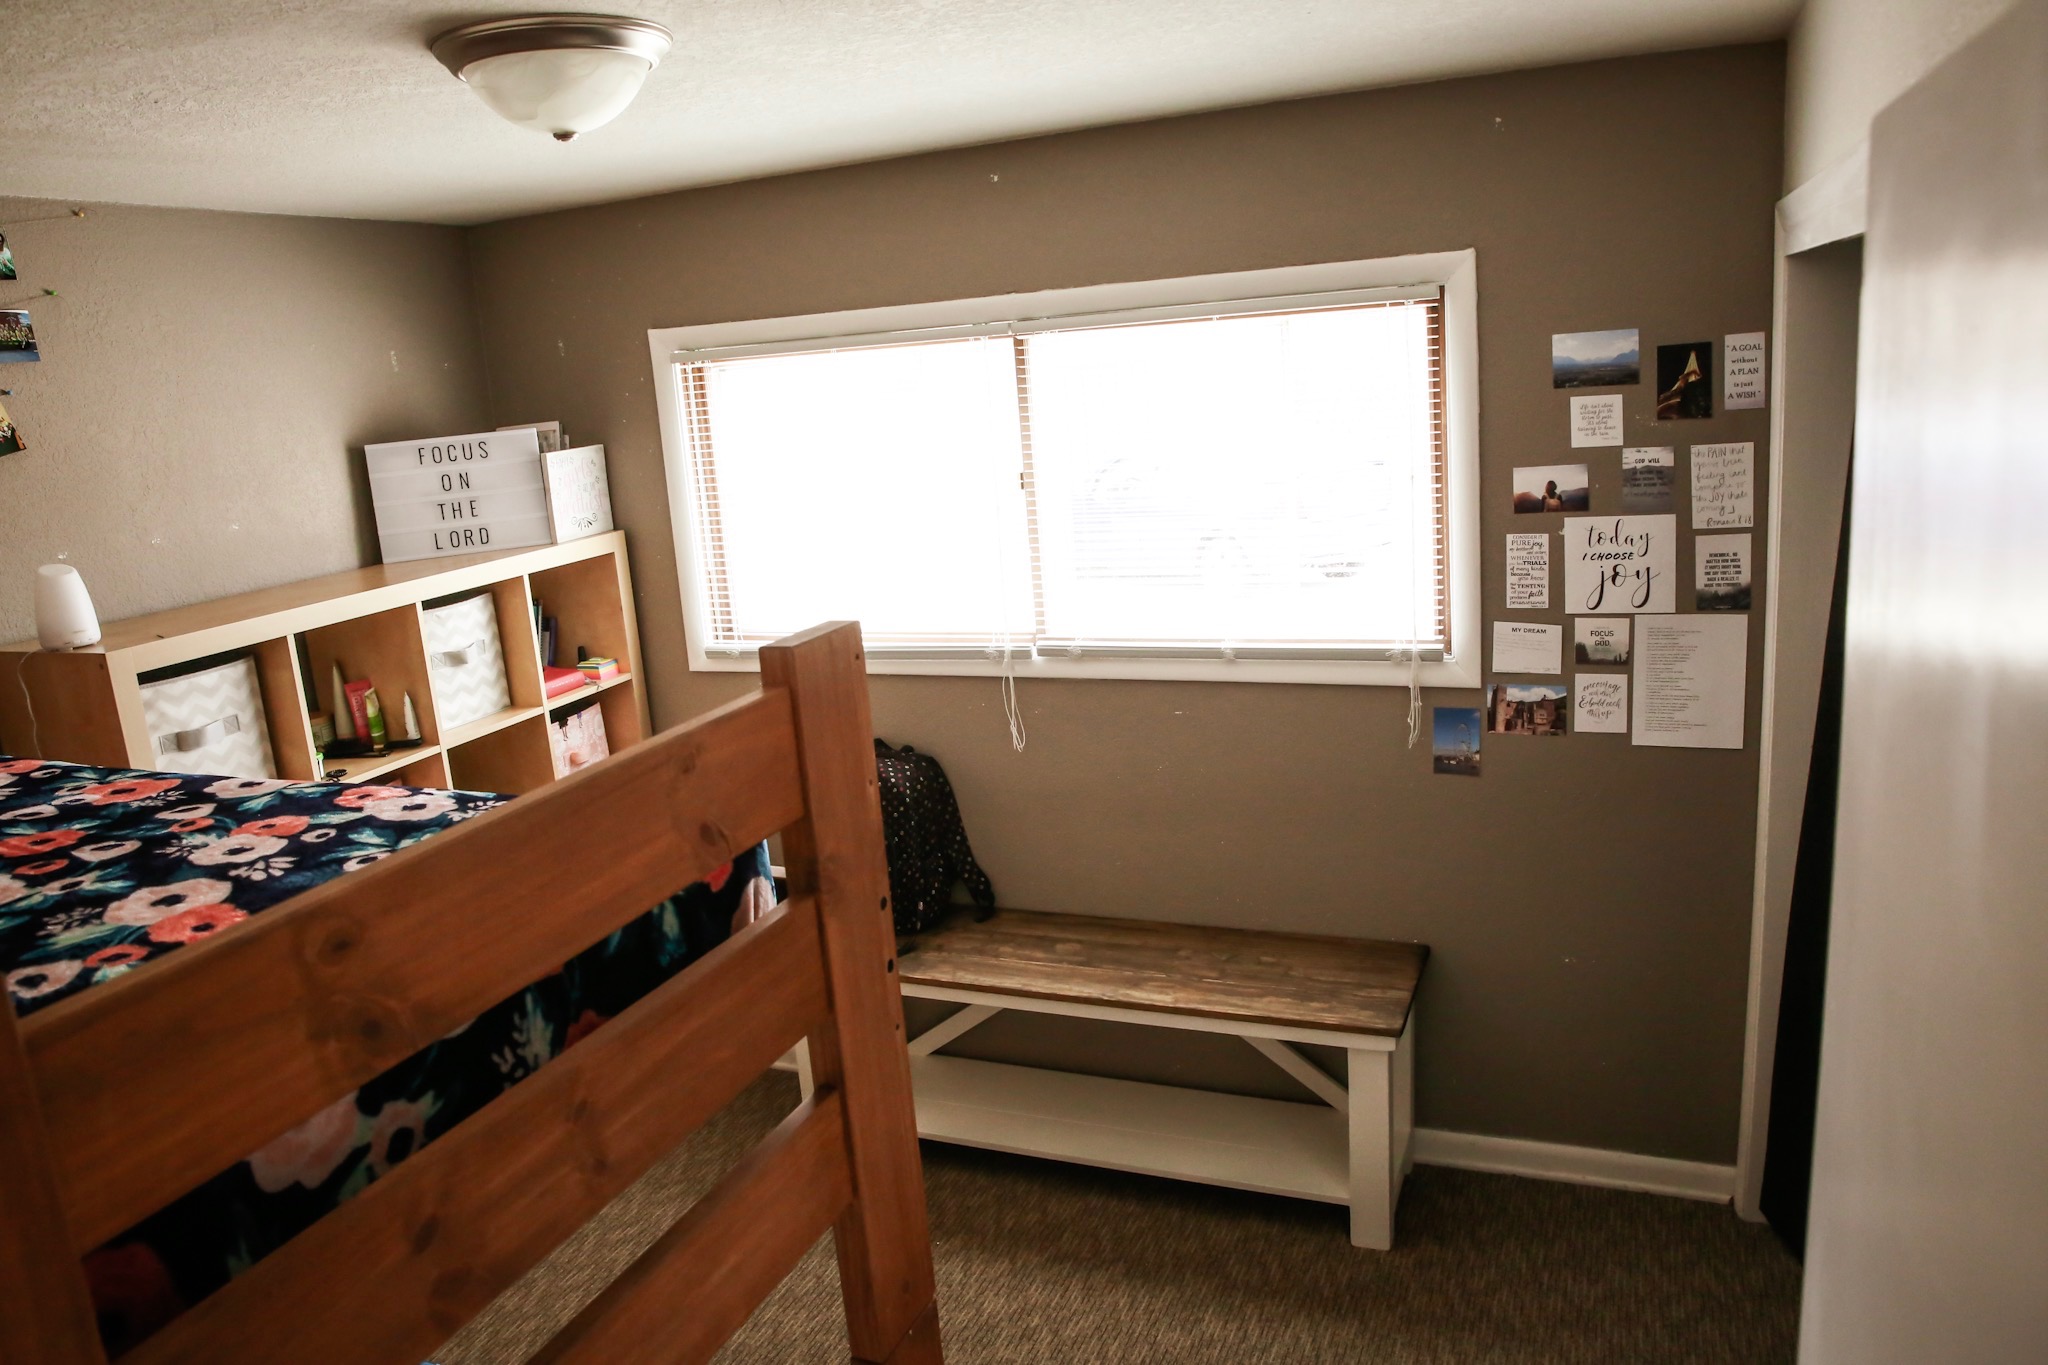  With two bedrooms per unit, each unit may host up to four students at a time. 